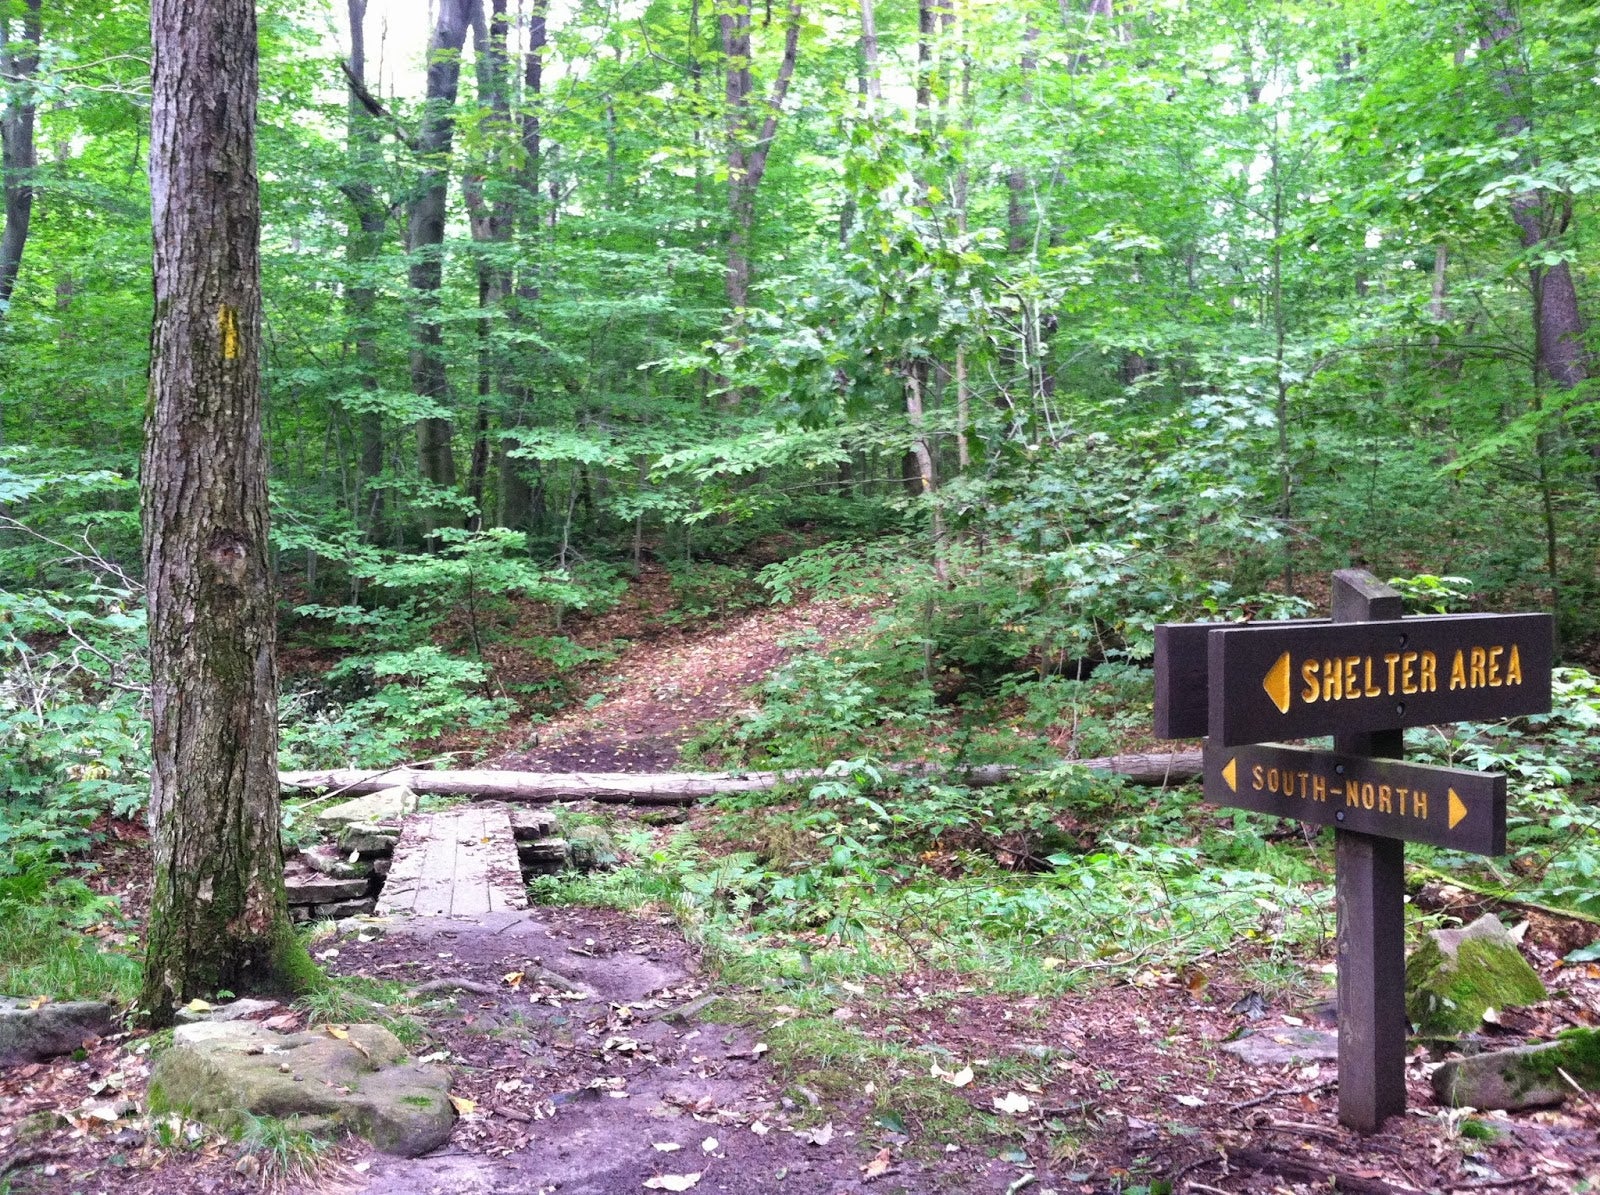 The trail through the park is long and well marked.